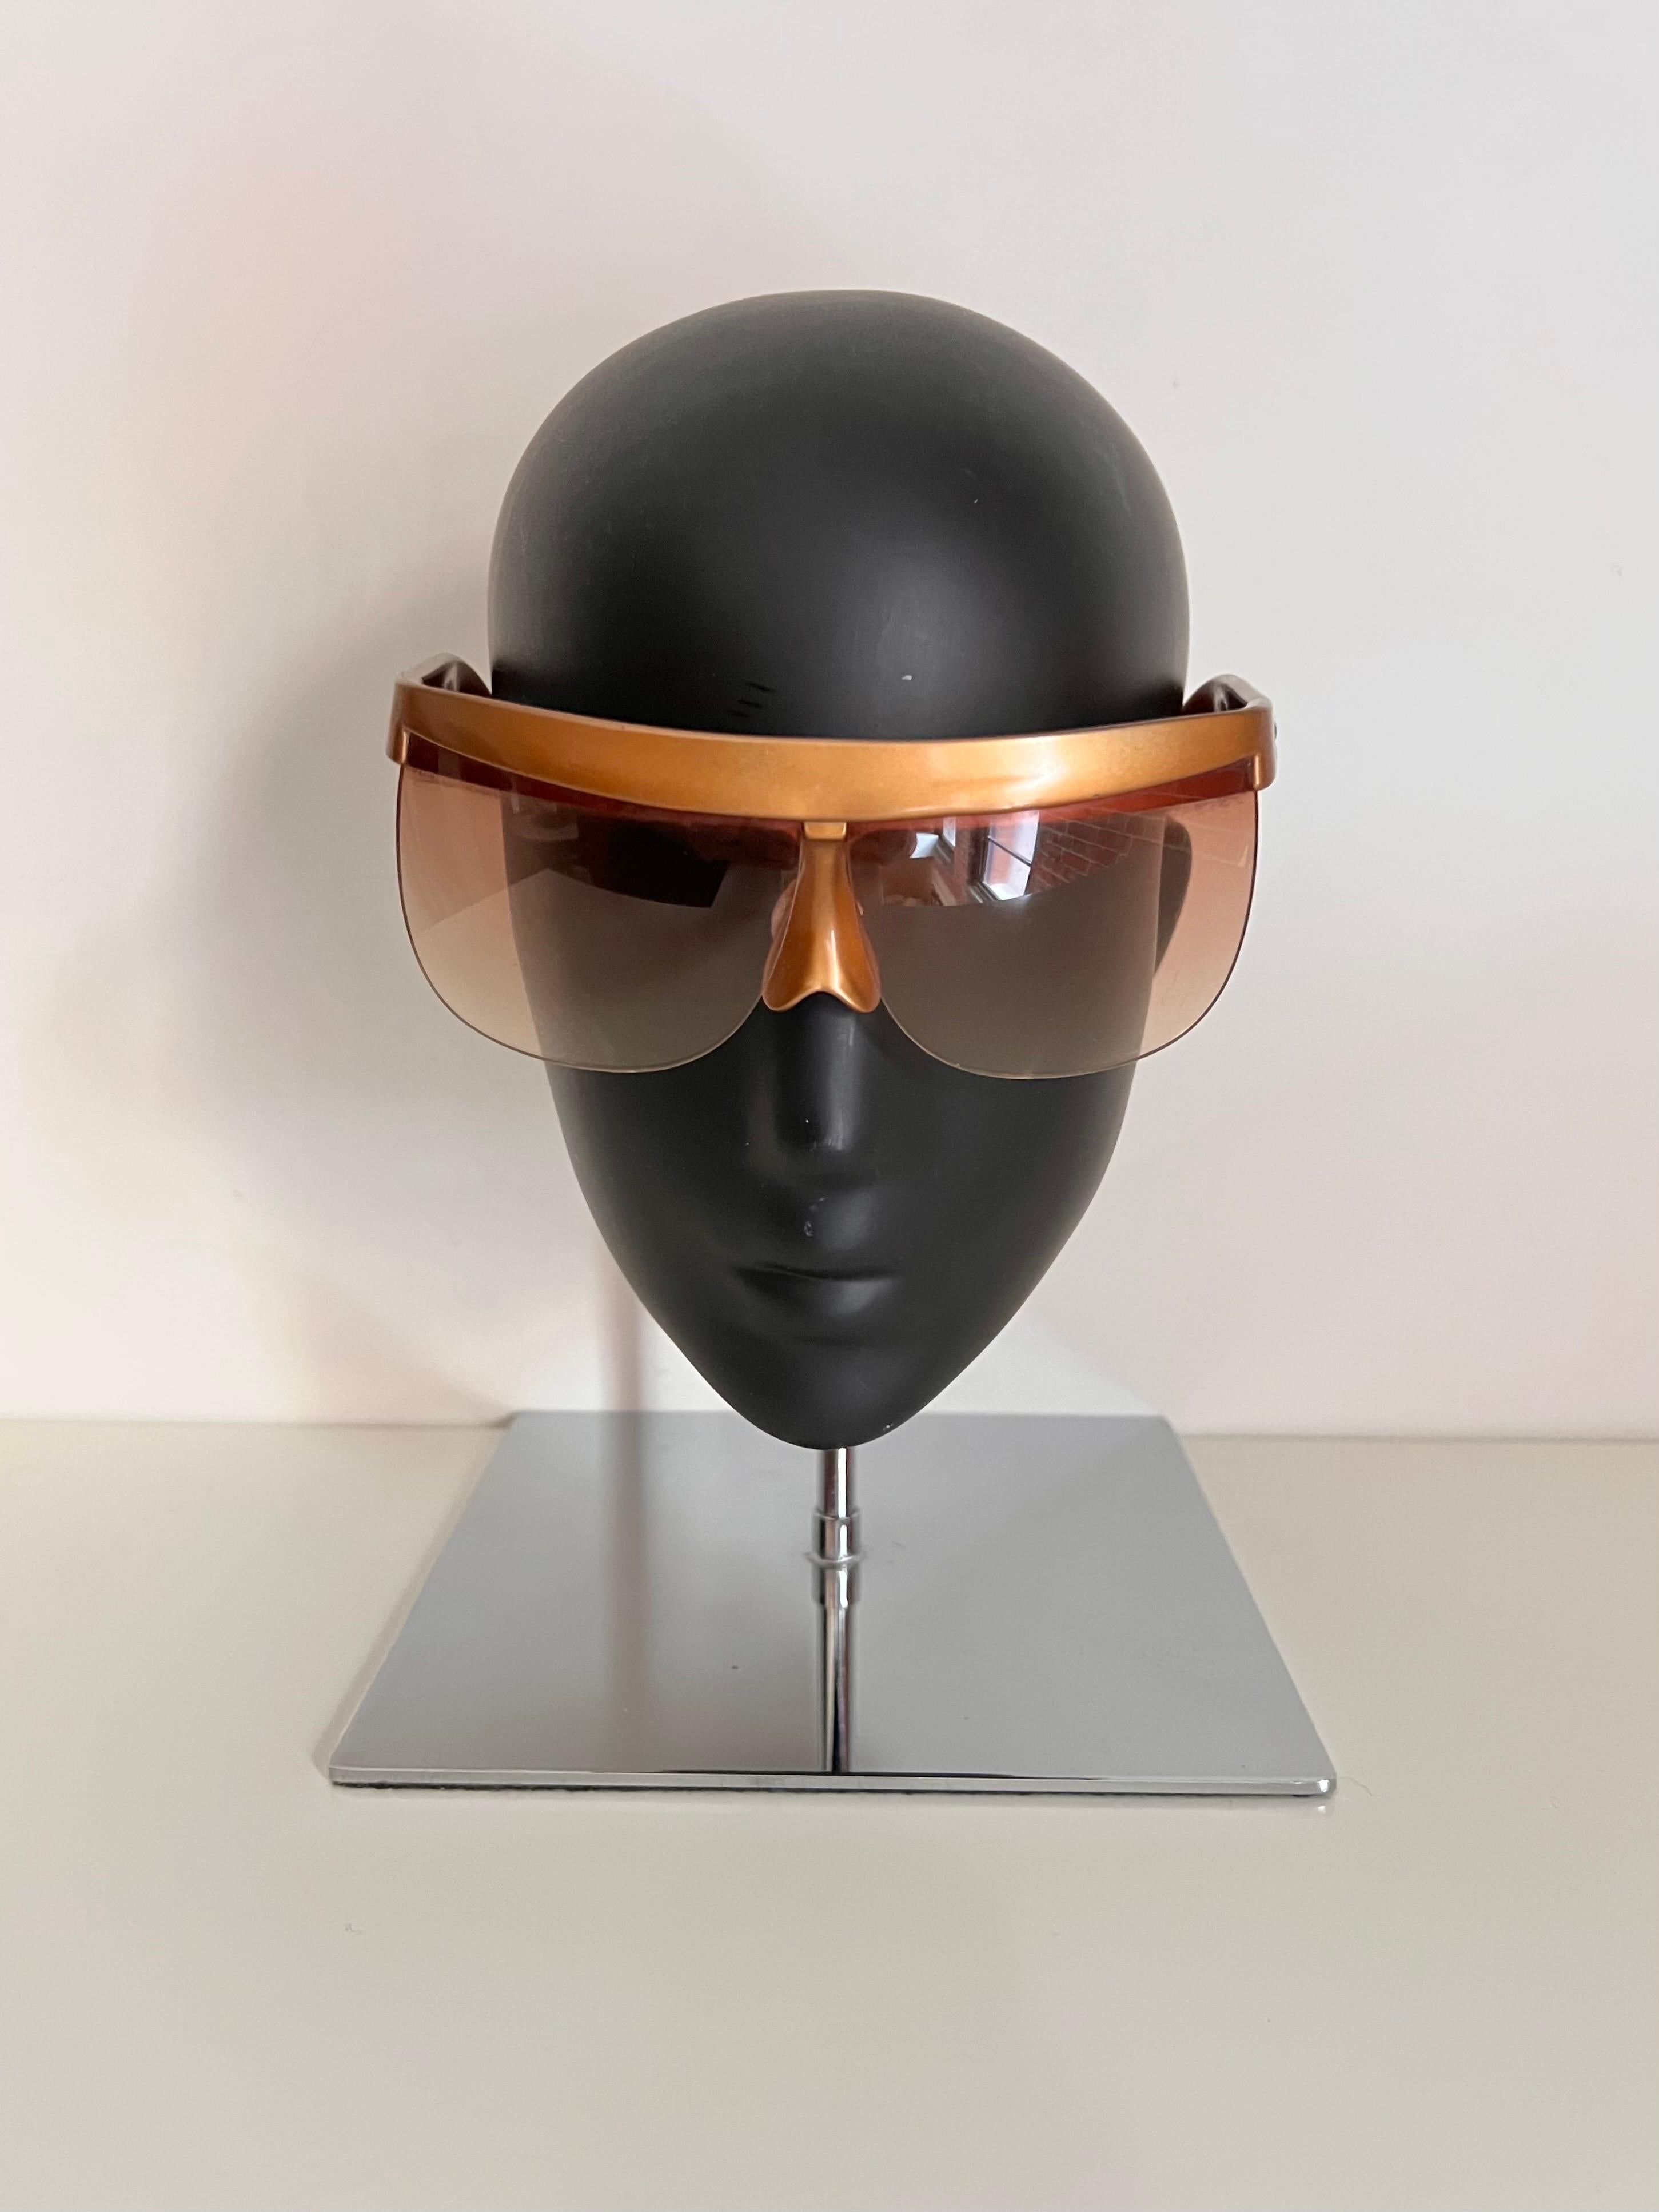 Avant garde, rare and unique Andre Courreges 7853 1980’s style sunglasses. Sleek gold futuristic mask frame holding a graduated tint pair of gold lenses.

One of a kind piece of eyewear history.

In very good vintage condition, does have some minor